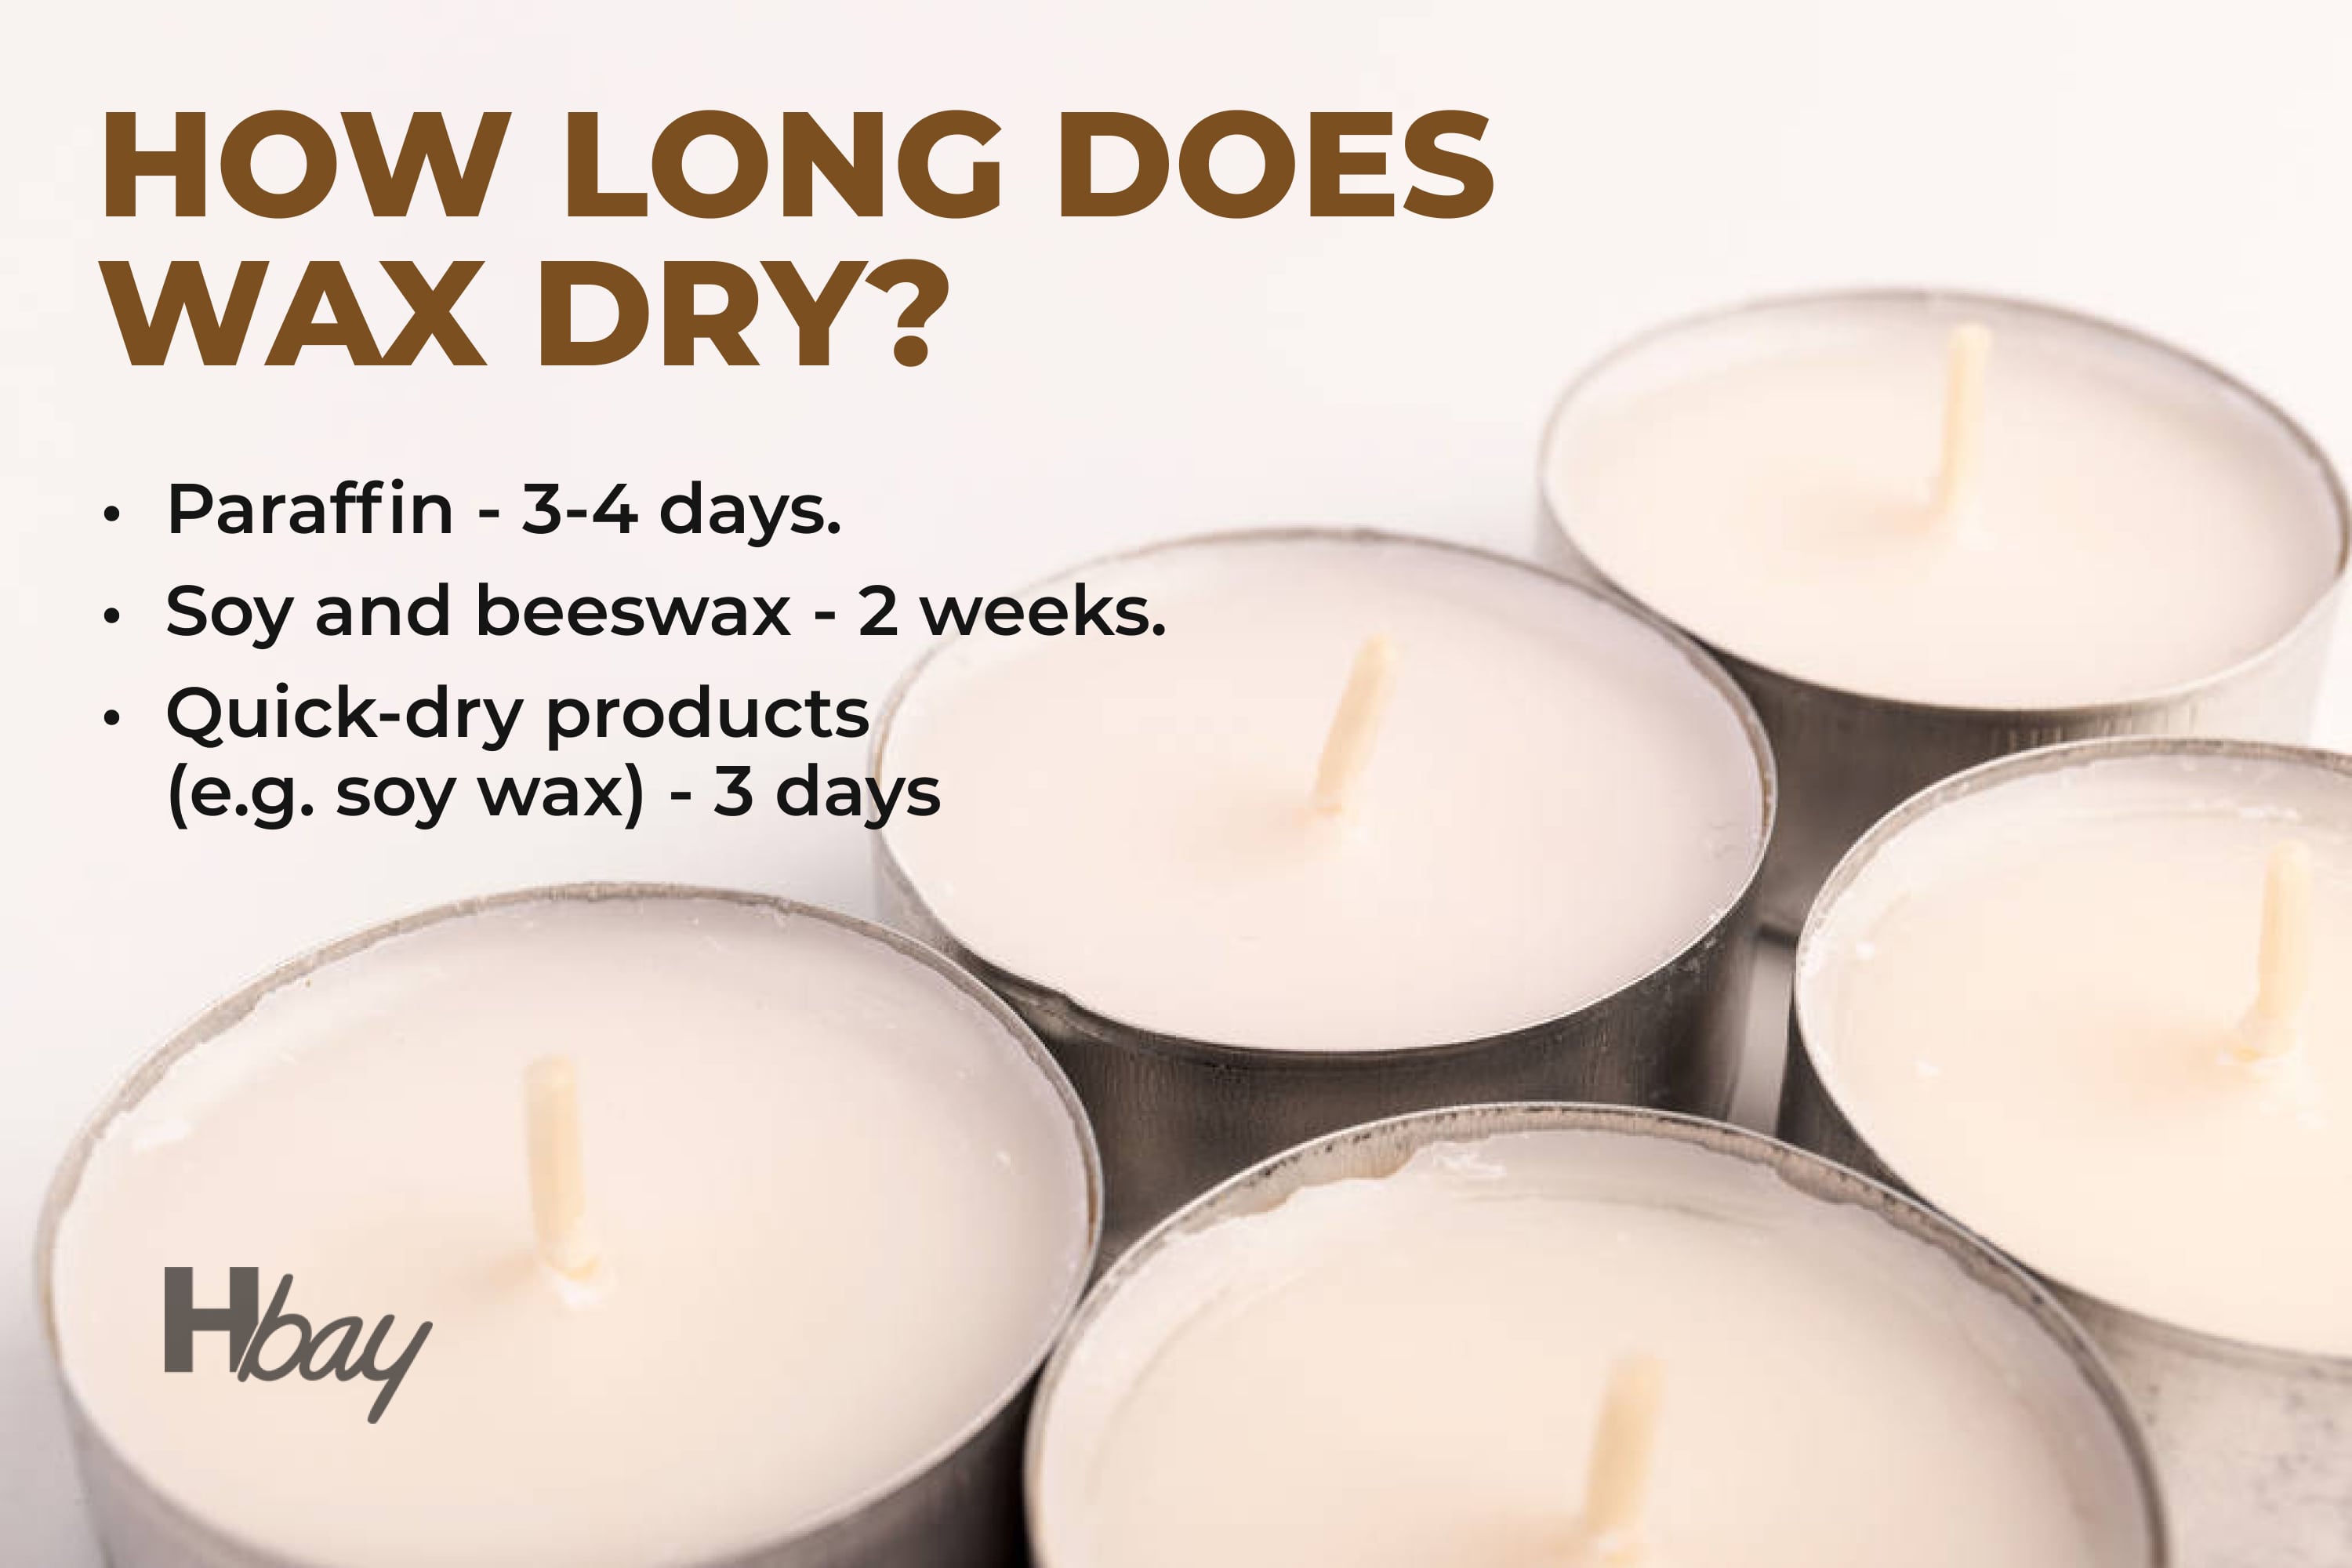 How long does wax dry